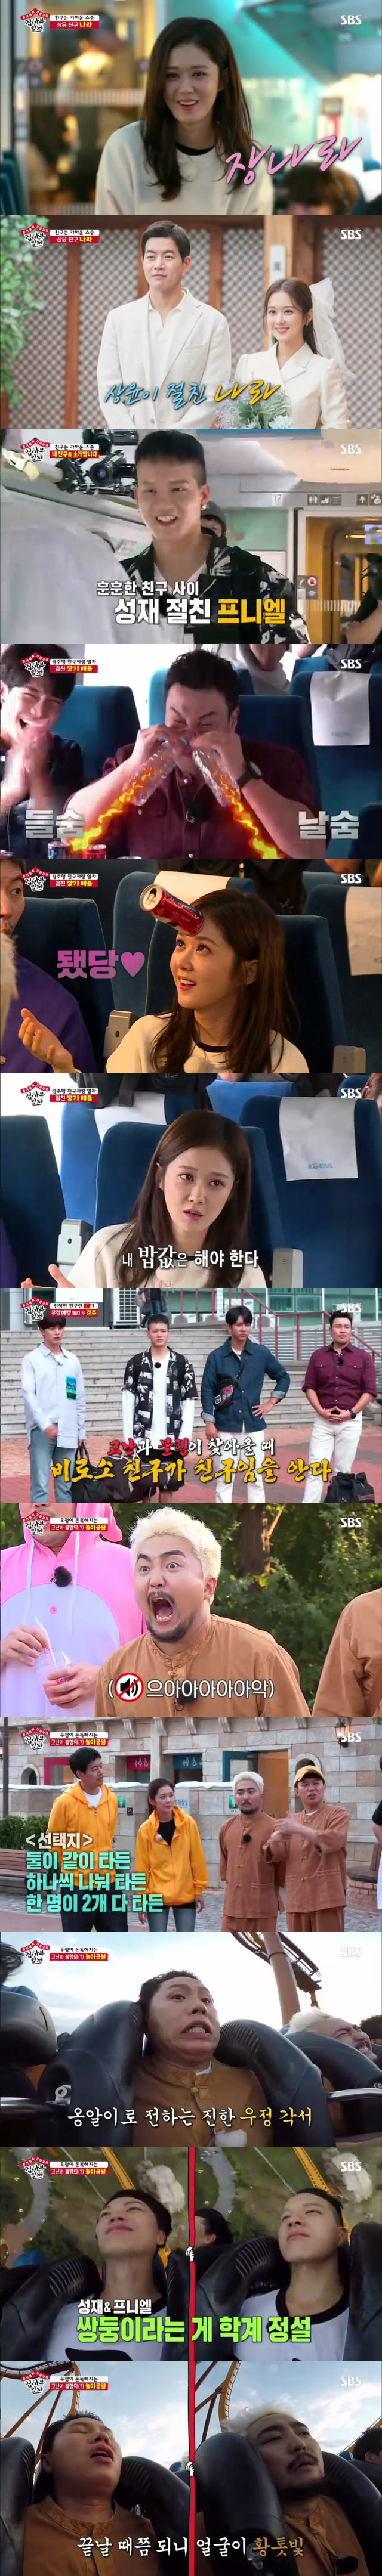 SBS All The Butlers attracted the attention of viewers with a friendship travel special that can look back on the meaning of true Friend.According to Nielsen Korea, SBS All The Butlers furniture TV viewer ratings, which were broadcast on the 22nd (Sun), were 7.3% (hereinafter the second part of the metropolitan area), and 2049 target TV viewer ratings, which were collected for young viewers aged 20 to 49, recorded 3.7%.Top TV viewer ratings per minute soared to 8.4 percent, attracting attention.The broadcast was featured on the Friend Master special, and a moisturizing trip to Gyeongju was drawn with friends invited by Lee Seung-gi, Lee Sang-yoon, Yang Se-hyeong and Yook Sungjae.The members invited Friend, who had many things to learn most about each, to say of Friend, whom Lee Sang-yoon invited, The personality is not insane.I am serious, he said. I am a friend with a lot of talent in various fields.As the question of who the invited friend would be, Actor Jang Na-ra, the friend of Lee Sang-yoon, first appeared and led the cheers of the members.Jang Na-ra said: I was a bit serious and not funny, so I was not good at performing, but (Lee Sang-yoon) told me not to worry.I said I would take care of everything. Then Jang Na-ra said to Lee Sang-yoon, who is breathing in the drama VIP scheduled to be broadcast, It feels like this boss on our team.I am doing my best and it is the funniest in our team. Followed by Friend Yoo Byung-jae in Yang Se-hyeong, Friend Actor Shin Seung-Hwan in Lee Seung-gi, and Friend Bitobi Peniel Shin in Yook Sungjae.Lee Seung-gi said that Shin Seung-Hwans advantage was a good catcher.Shin Seung-Hwan showed off his organs by blowing a PET bottle with his nose and attaching a can to his forehead as a nickname of Jung Seung-hwan.However, Yoo Byung-jae also easily blew a PET bottle with his nose, followed by Jang Na-ra, who succeeded in two organs and intercepted everyones applause.In the meantime, Jang Na-ra handed out his favorite snack, the sweetened jelly, to the members. Lee Sang-yoon added, I ate this only the day I filmed.Yoo Byung-jae asked, I have been around for nearly 20 years and I still feel nervous, and Jang Na-ra replied, The more you do, the worse you get.Lee Sang-yoon, who watched Jang Na-ra, said, Jang Na-ra is always very sorry when I NG, and Jang Na-ra said, I always think that I should pay for my rice and take responsibility.Jang Na-ra said, I will have the capacity and role I expect while casting, but I am always nervous that I will not be able to do it.The crew introduced the members and friends who arrived at the race to the Friend knows that Friend is Friend only when hardship and misfortune come of the proverb about Friend.The members were worried about the mission to be given in the future, and Yang Se-hyeong explained the Chinese character of Danger and said, It may be Danger or an opportunity.So lets think about friendship travel today and think about it in a good way. Since then, they have been wearing a couple of couples shared through friendship tests and visited the amusement park.The mission given at the amusement park was to share two pairs: Roller Coaster, which falls vertically to 90 degrees, and Roller Coaster, which is not foothold.Lee Seung-gi and Shin Seung-Hwan, who won the pre-game, were excluded from the boarding list, while Yook Sungjae and Peniel Shin, Yang Se-hyeong and Yoo Byung-jae decided to ride two Roller Coaster together.Meanwhile, Lee Sang-yoon said, In the Indian proverb, Friend is the one who goes with the sadness of Friend. He decided to ride two Roller Coaster alone on behalf of Jang Na-ra, who is highly afraid of heights.Instead, Lee Sang-yoon said, If you have a dance and a song after that, please do it instead, and Jang Na-ra responded happily.Following the warm scenes of the two Friends, the scene of Jang Na-ra singing his past hit song Sweet Dream was predicted, and this scene took the best one minute with 8.4% of the TV viewer ratings per minute, as it proved many peoples expectation for Singer Jang Na-ra.